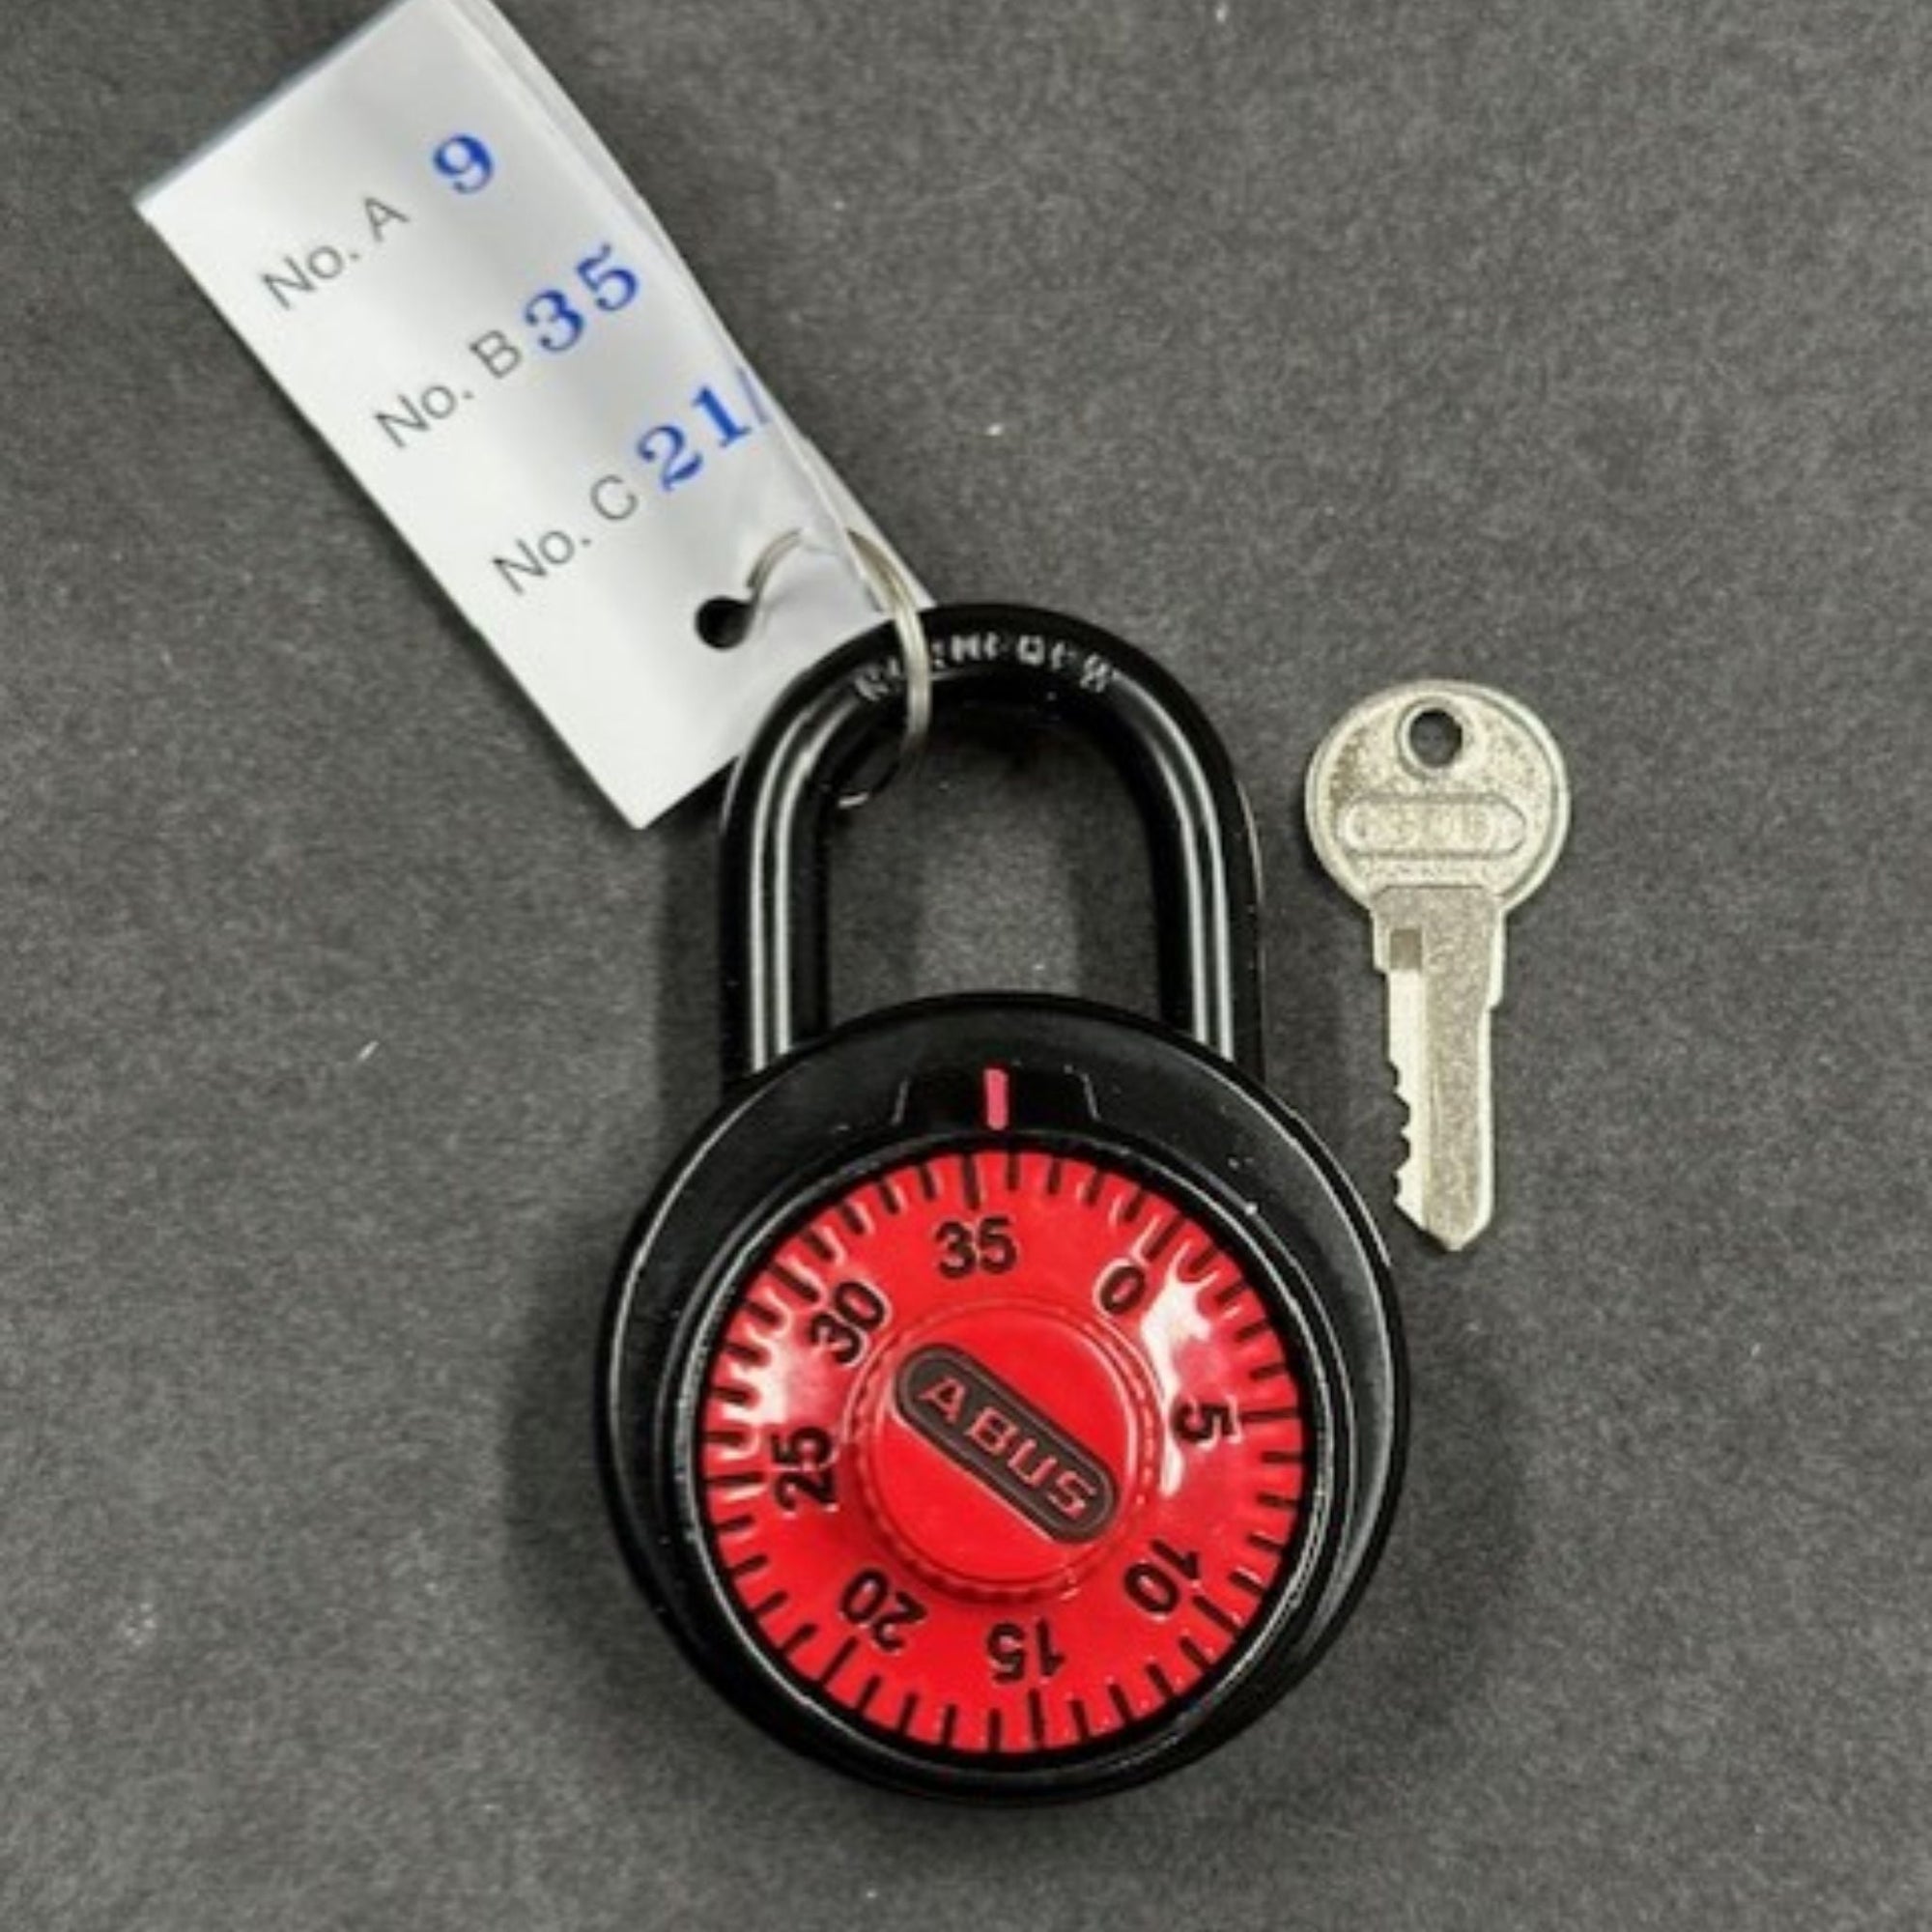 The Lock Source's "Keyed Combo" Features the Abus 78/50 KC Red Locker Padlock, With Combination, With Matching Control Key All Together, All At Once, Finally - The Lock Source